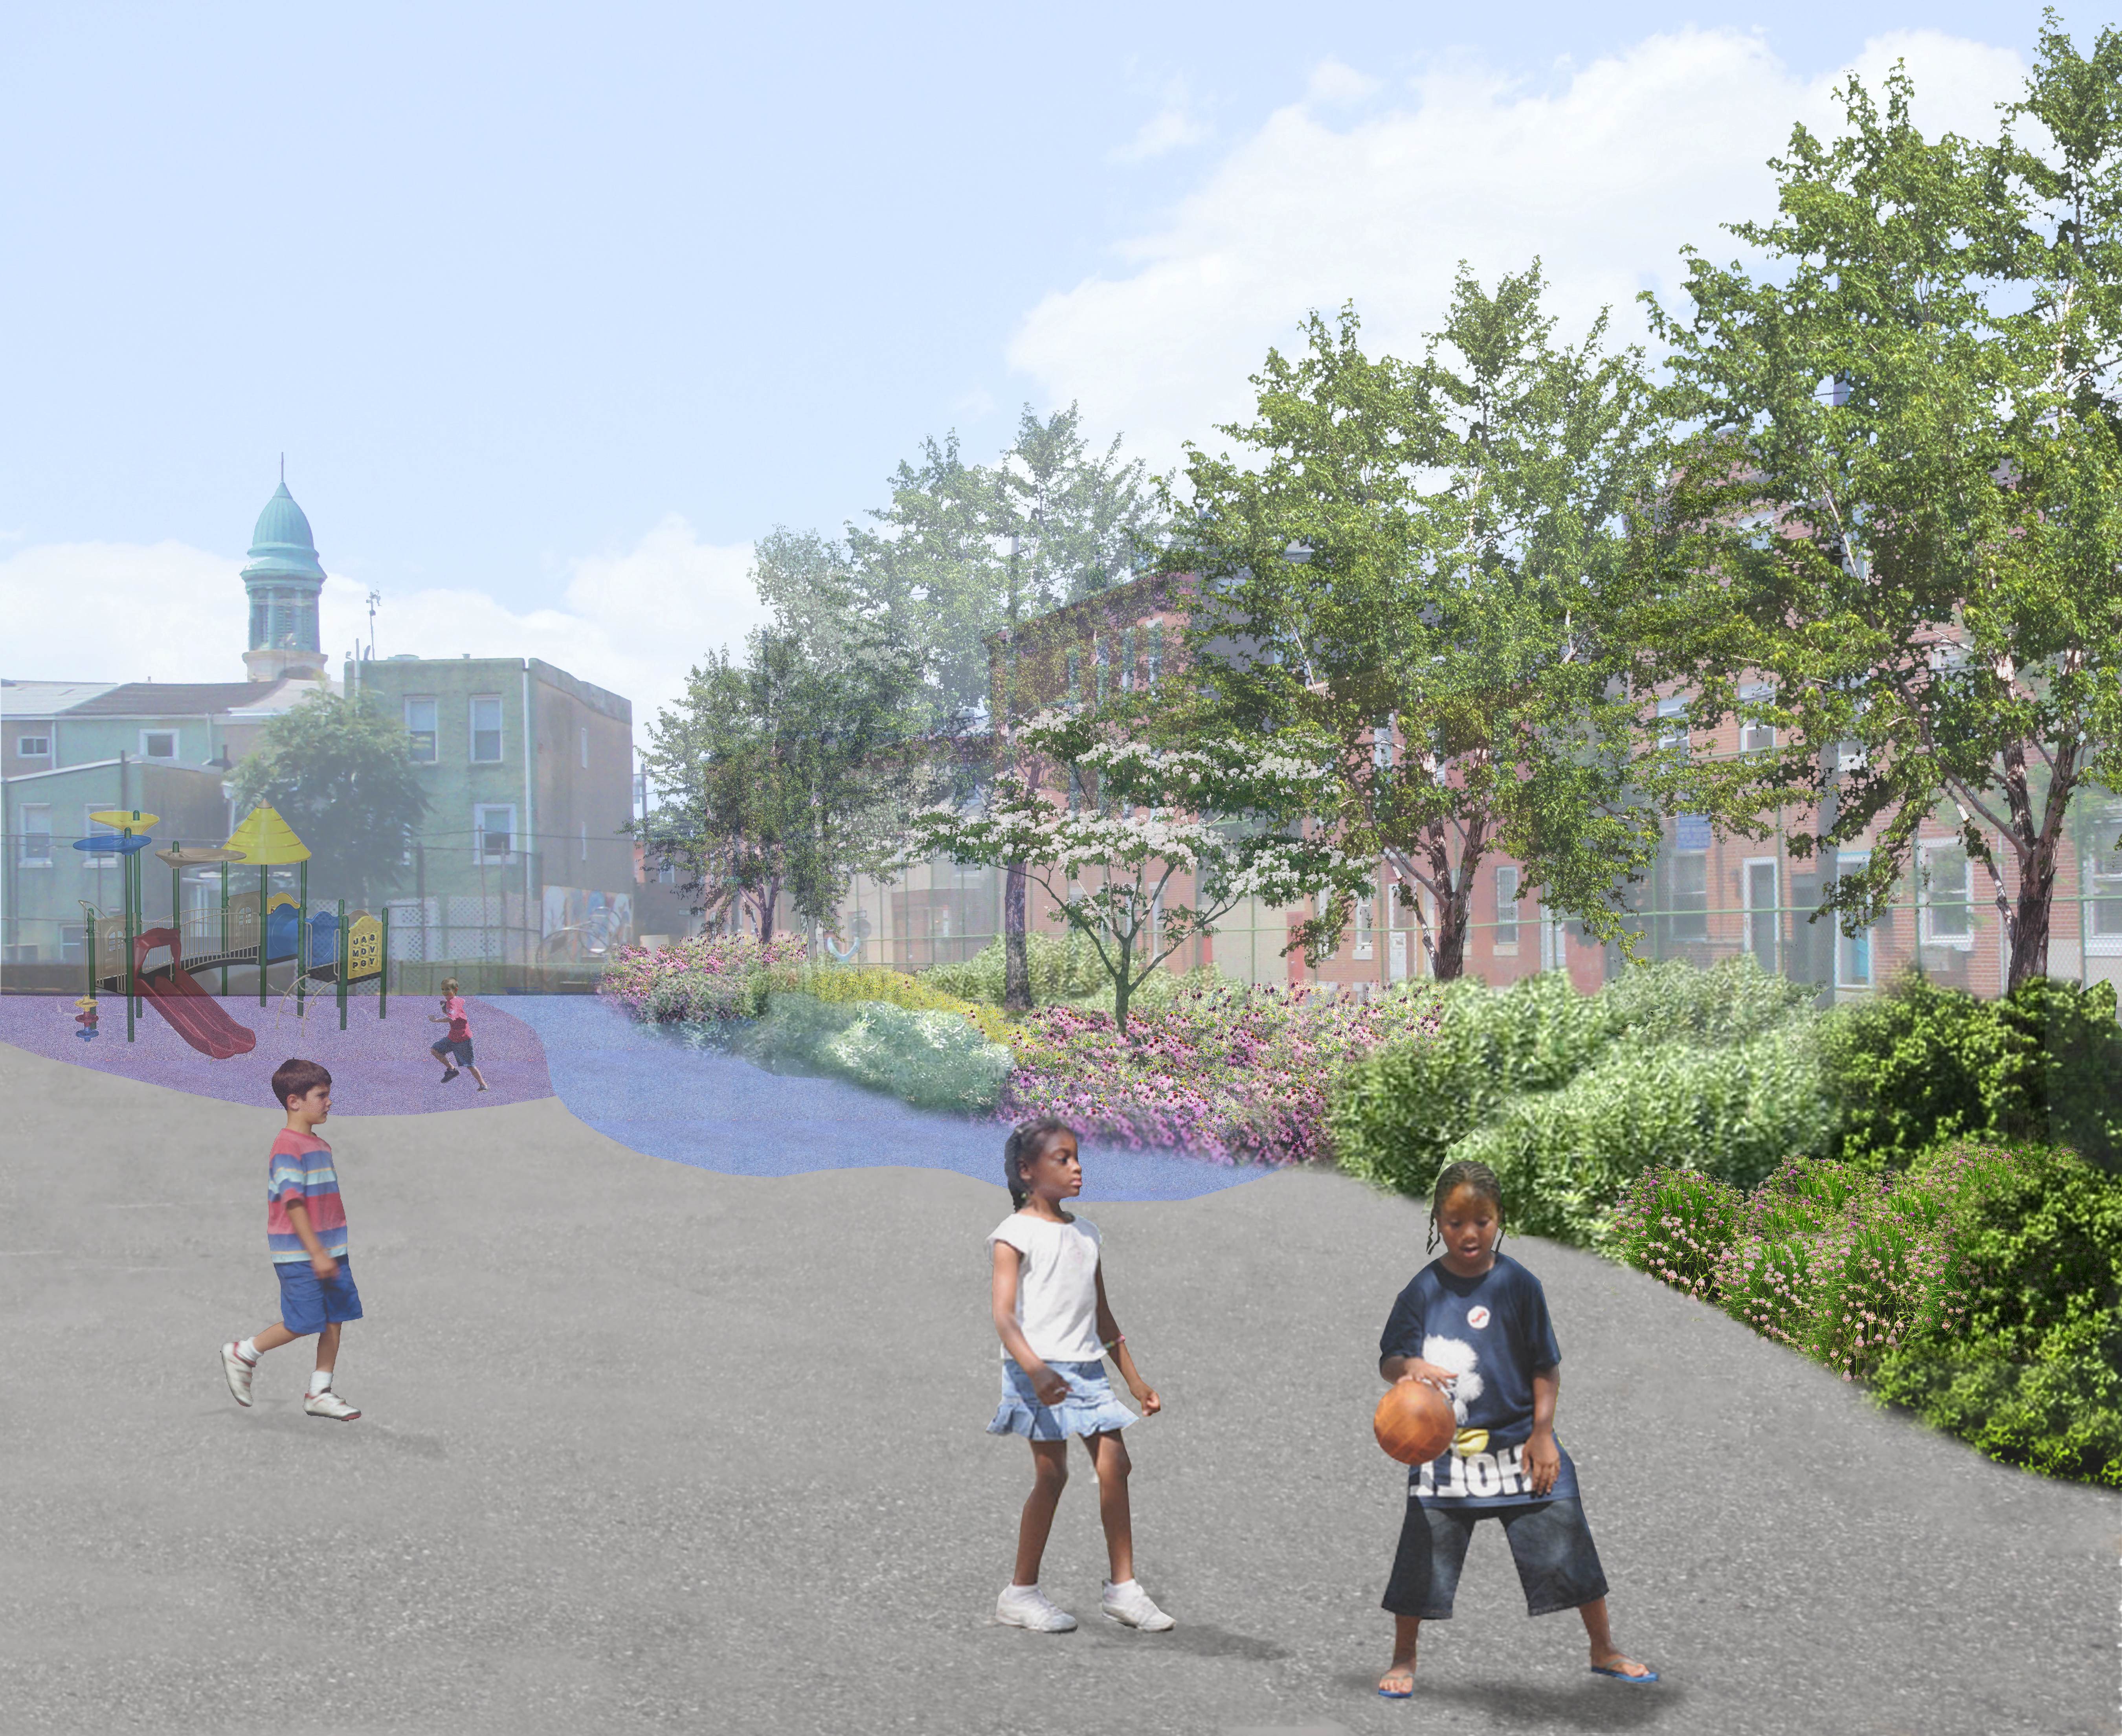 Three schools will receive the full PWD green stormwater management makeover, Rachel Ahern for the Philadelphia Water Department